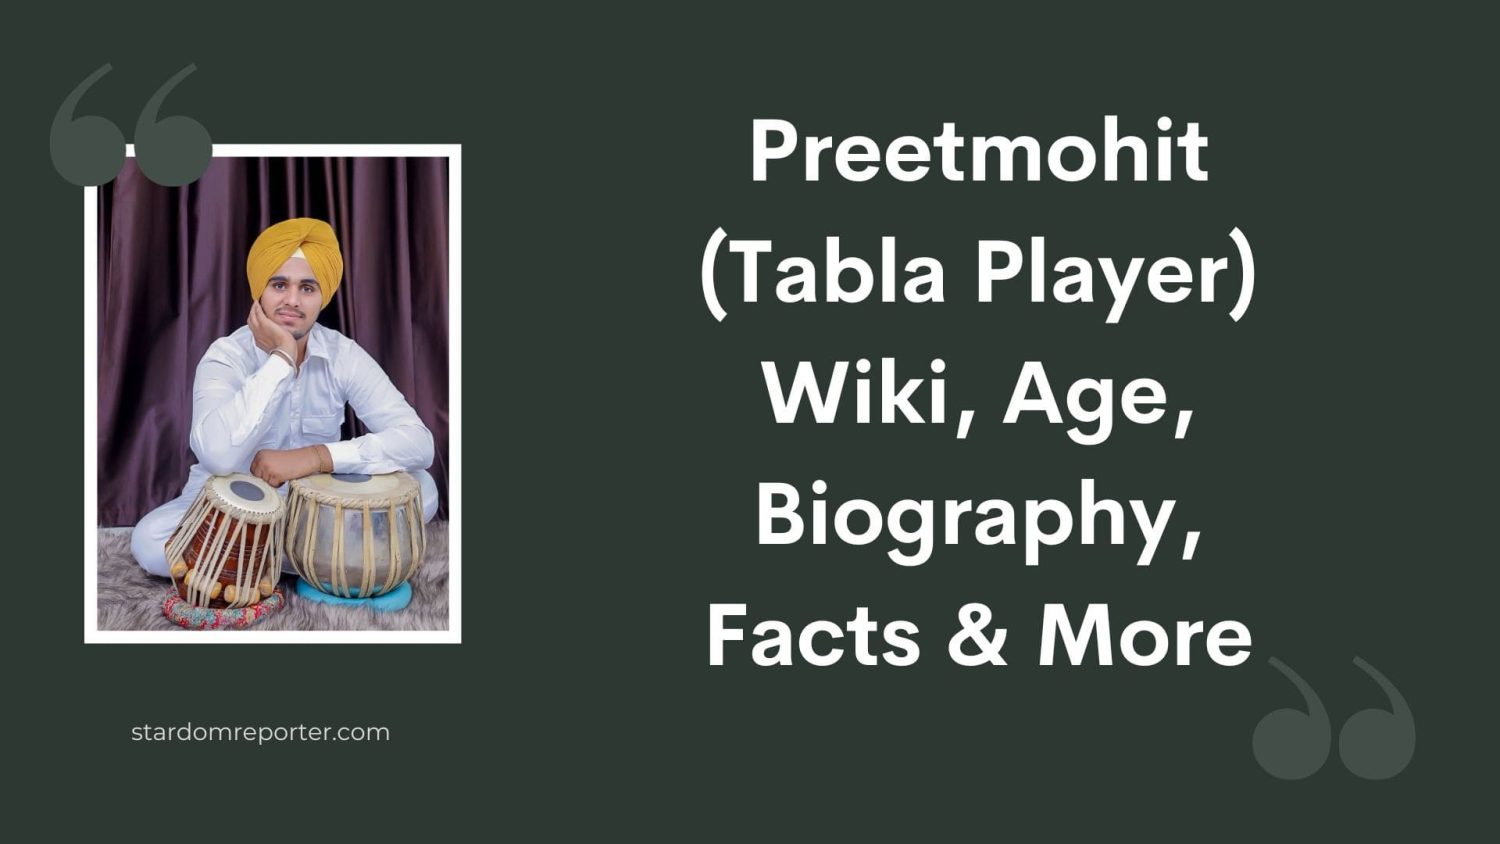 Preetmohit (Tabla Player) Wiki, Age, Biography, Facts & More - 1